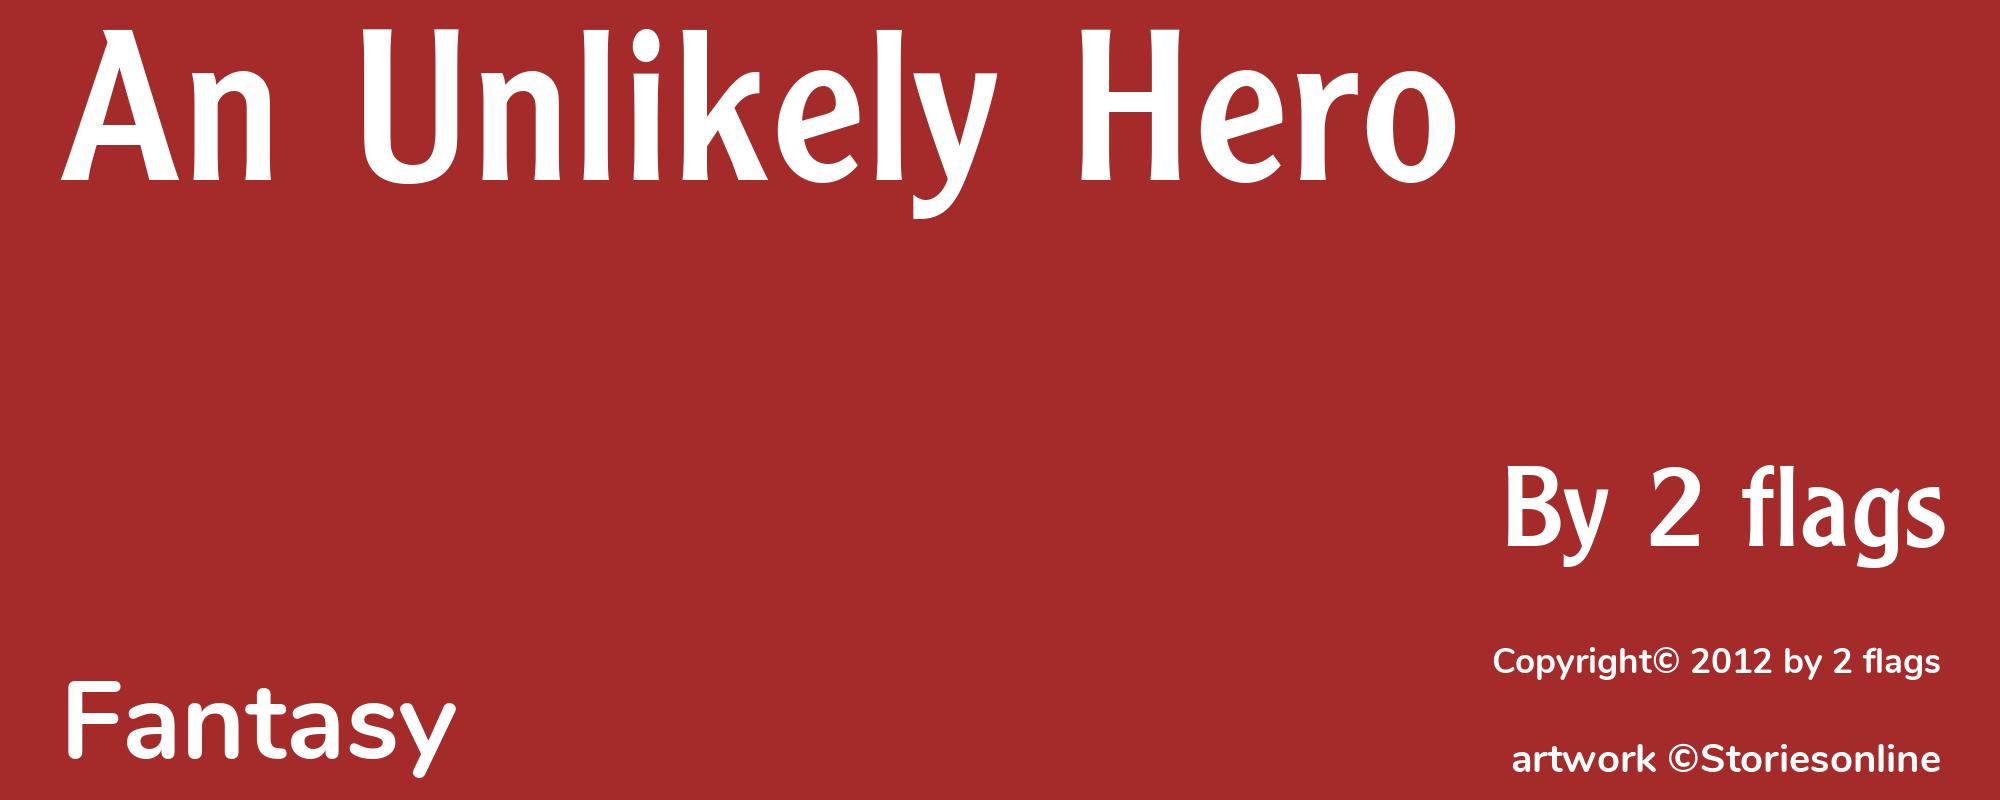 An Unlikely Hero - Cover